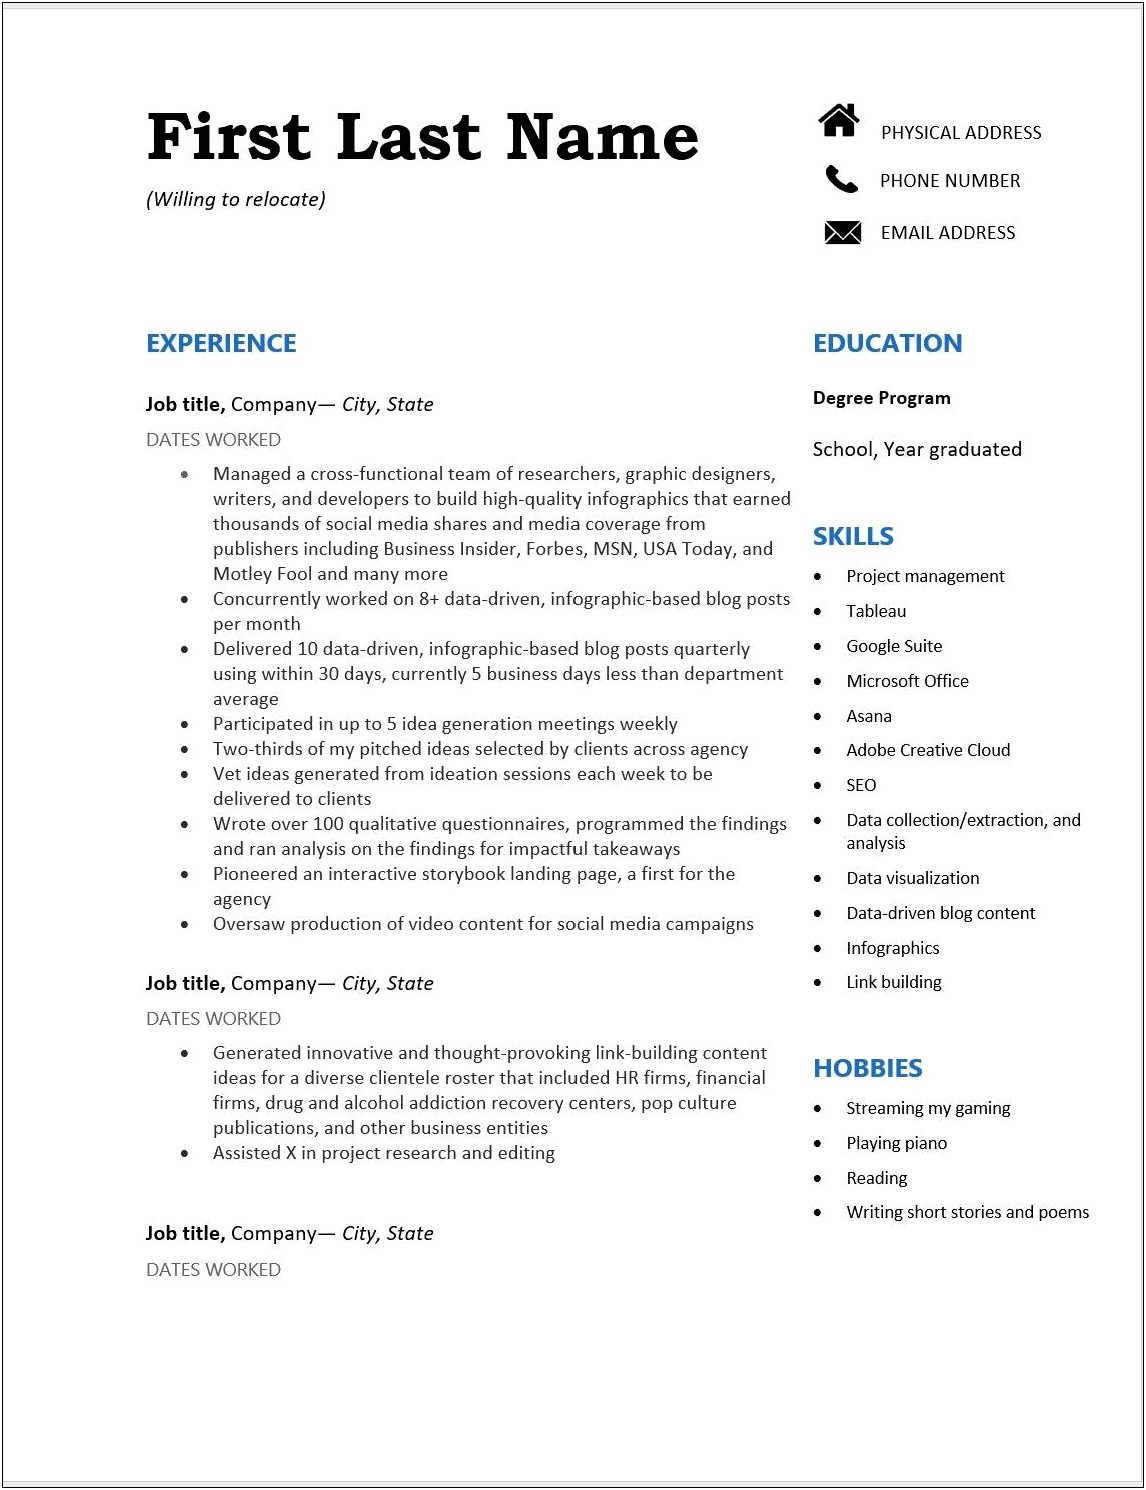 Unrelated Job Experience On My Resume